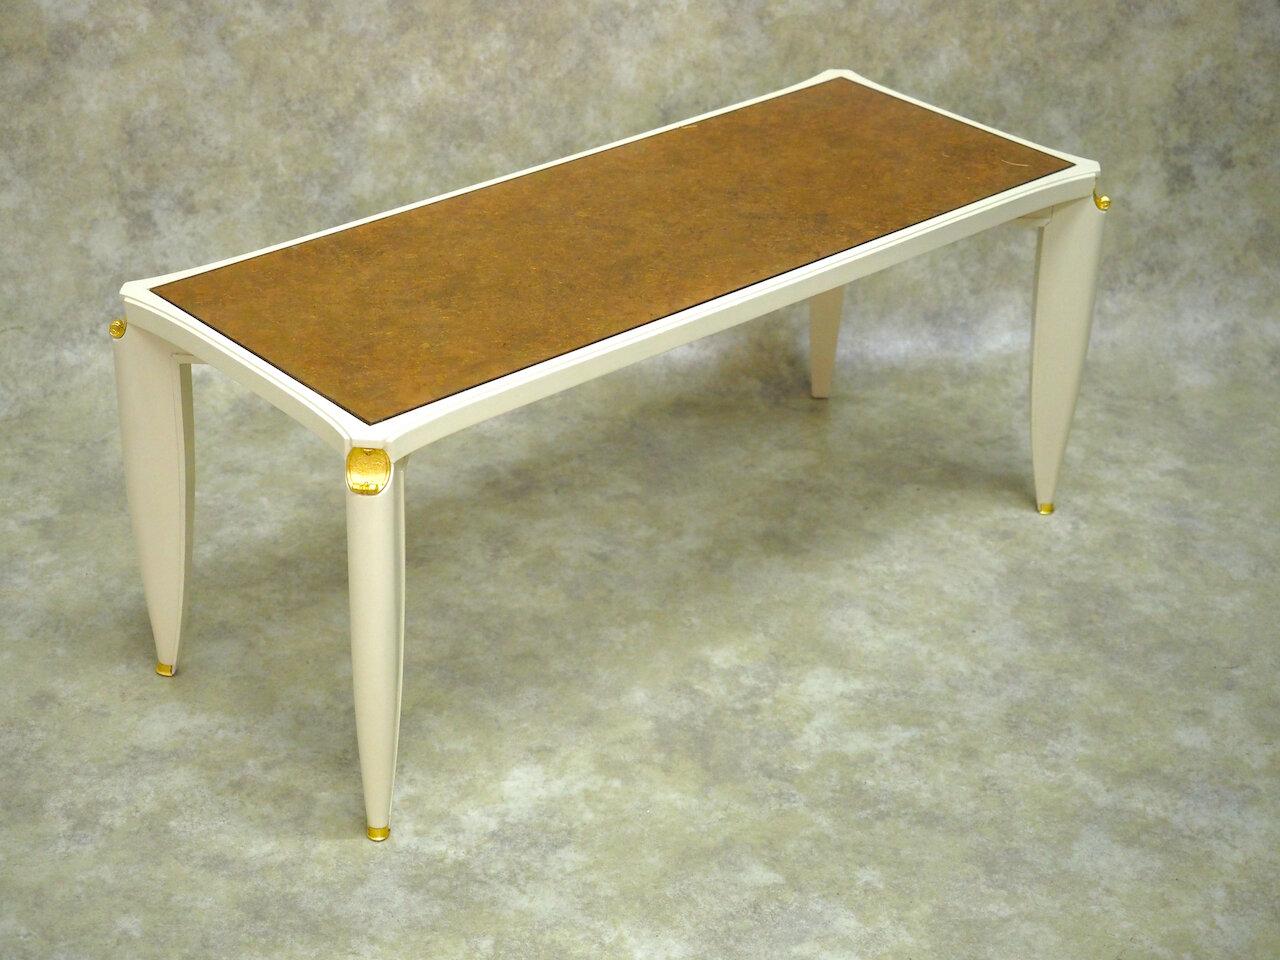 French Forties Art Deco coffee table by Maurice Jallot, circa 1947, in cream lacquer with original verre eglomise glass top and gilt bronze mounts. 40” long x 17” deep x 17” high. Pictured in Mobilier et Decoration, 1947. 

Maurice